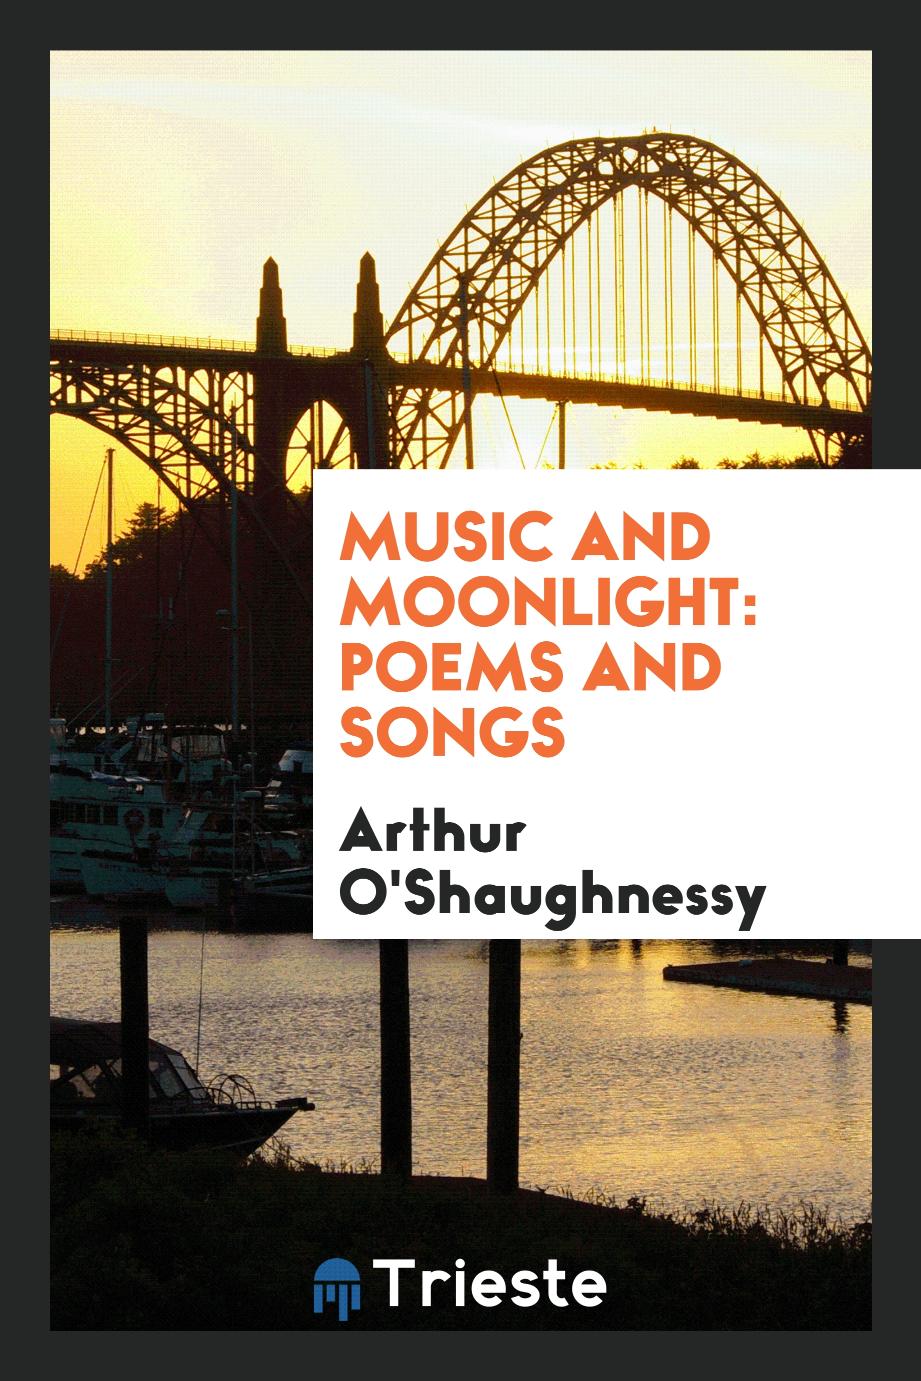 Music and moonlight: poems and songs